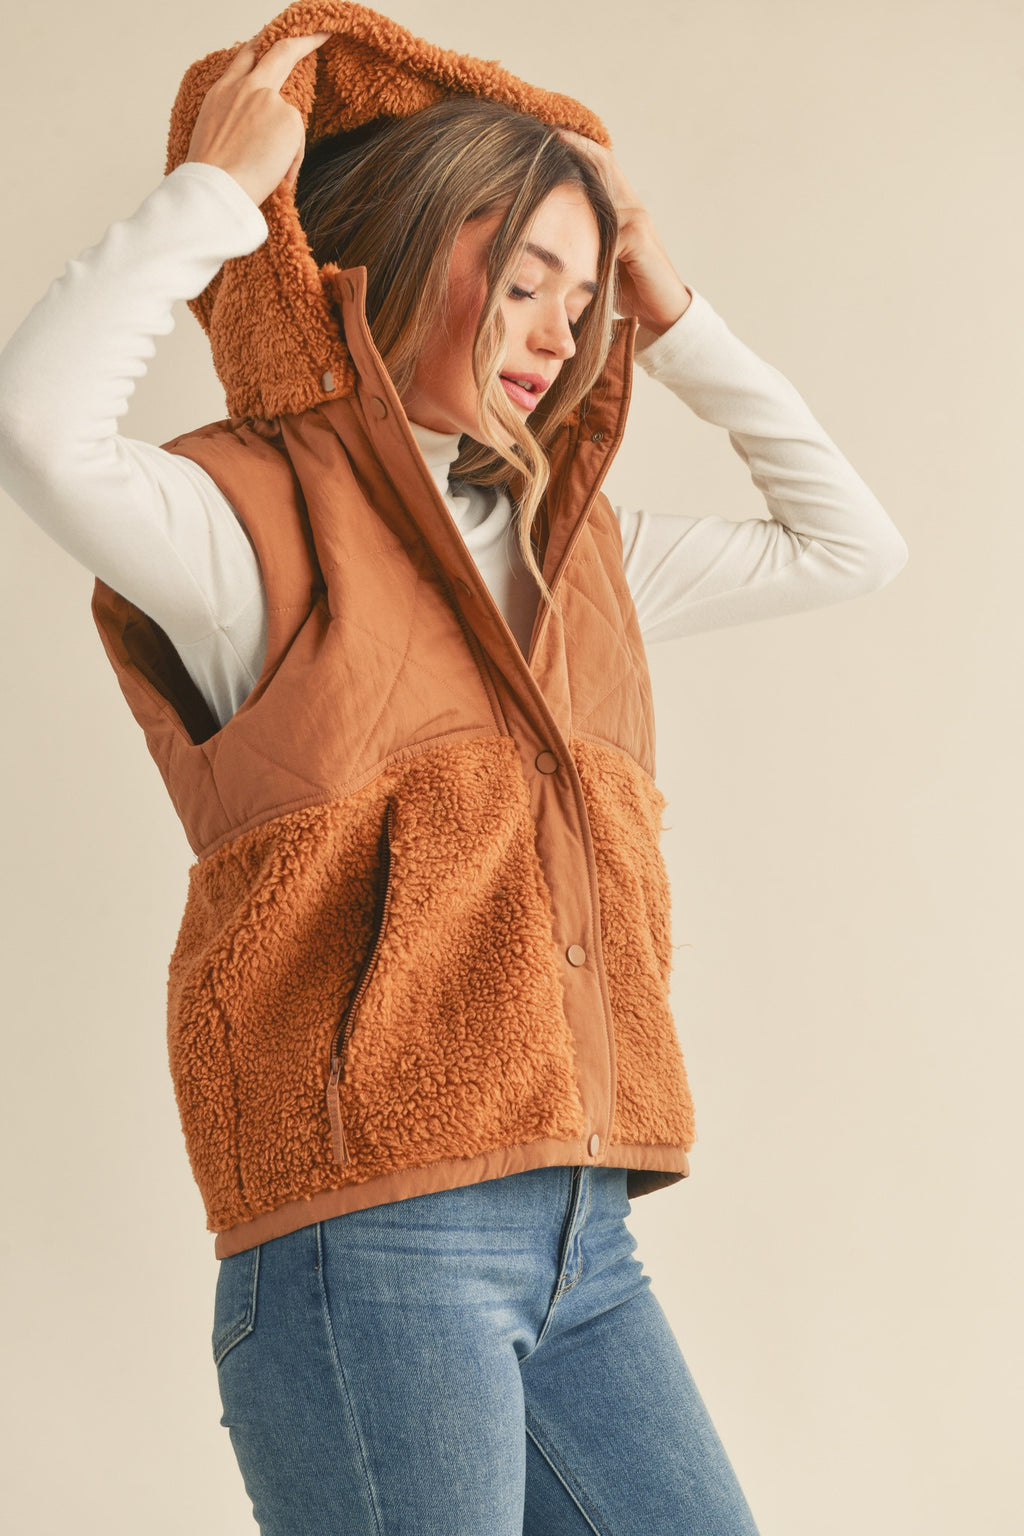 Mixed Media Hooded Vest- Copper Brown